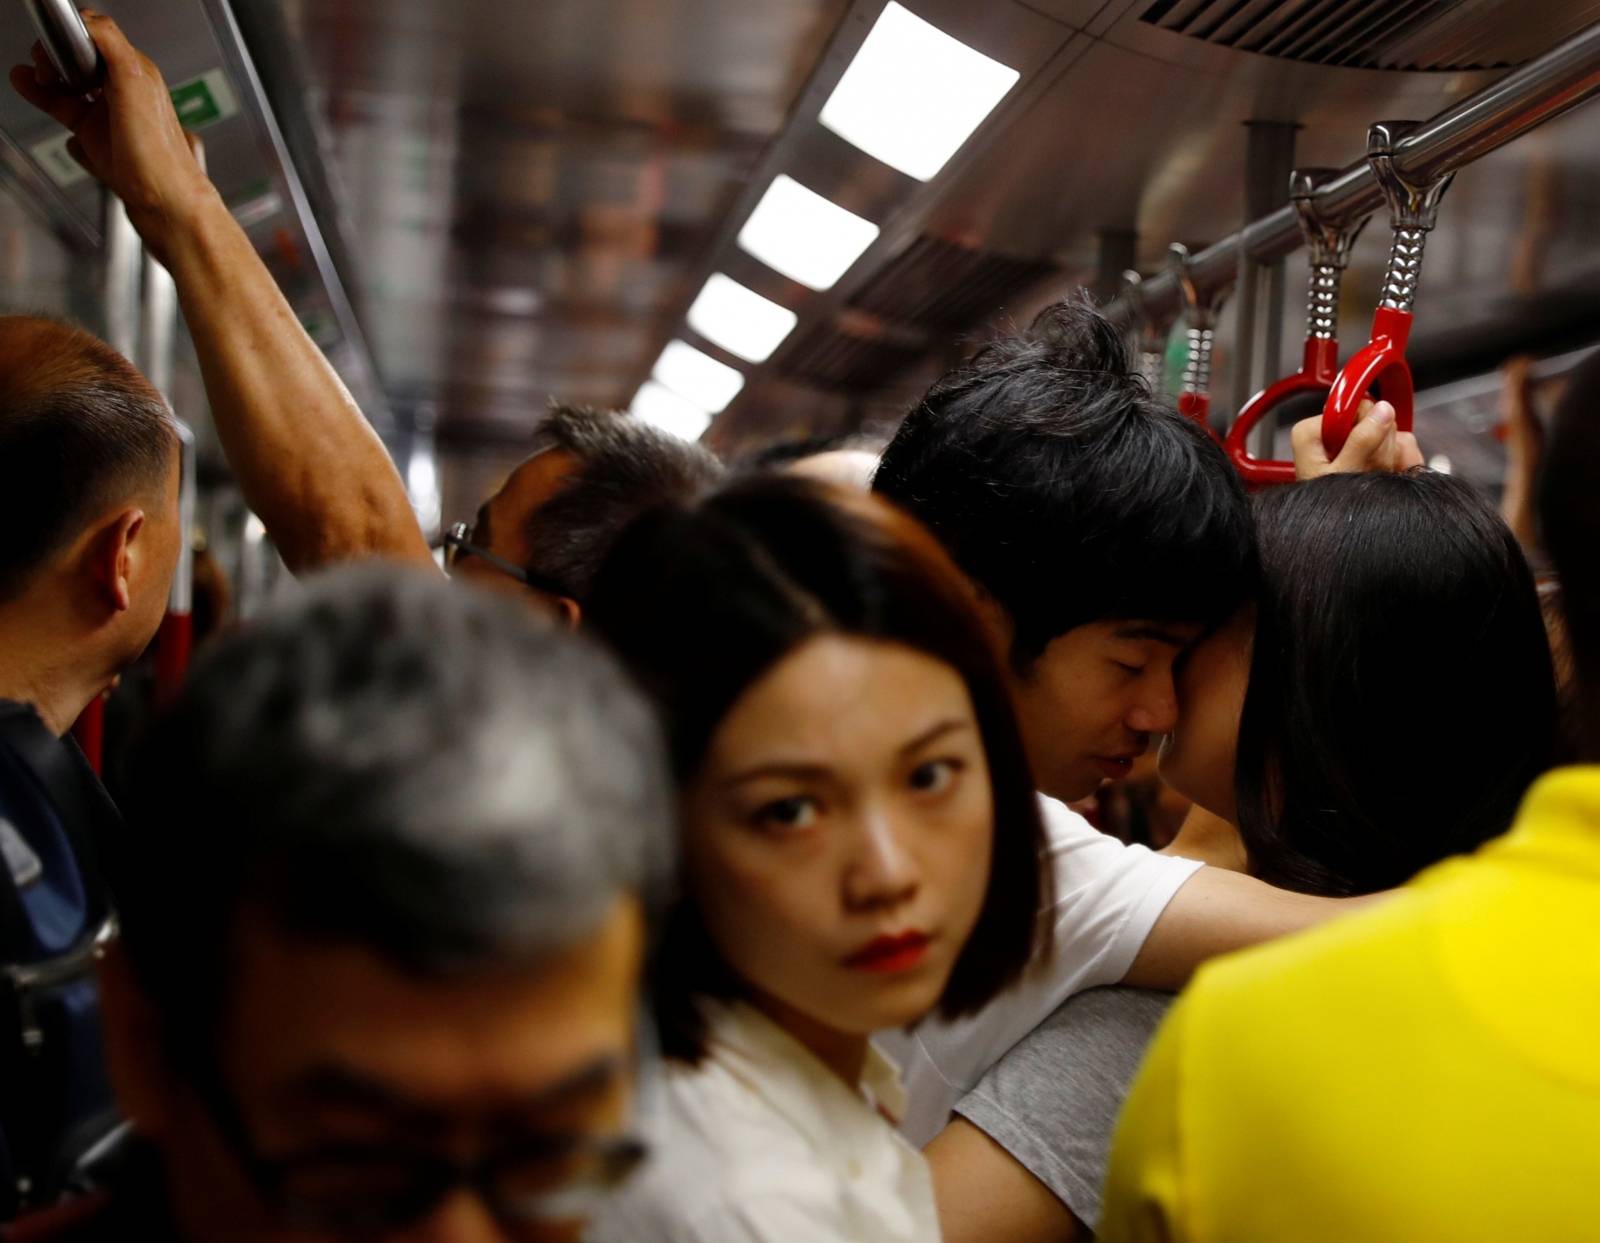 A couple shares a light moment in a Mass Transit Railway subway train in Hong Kong